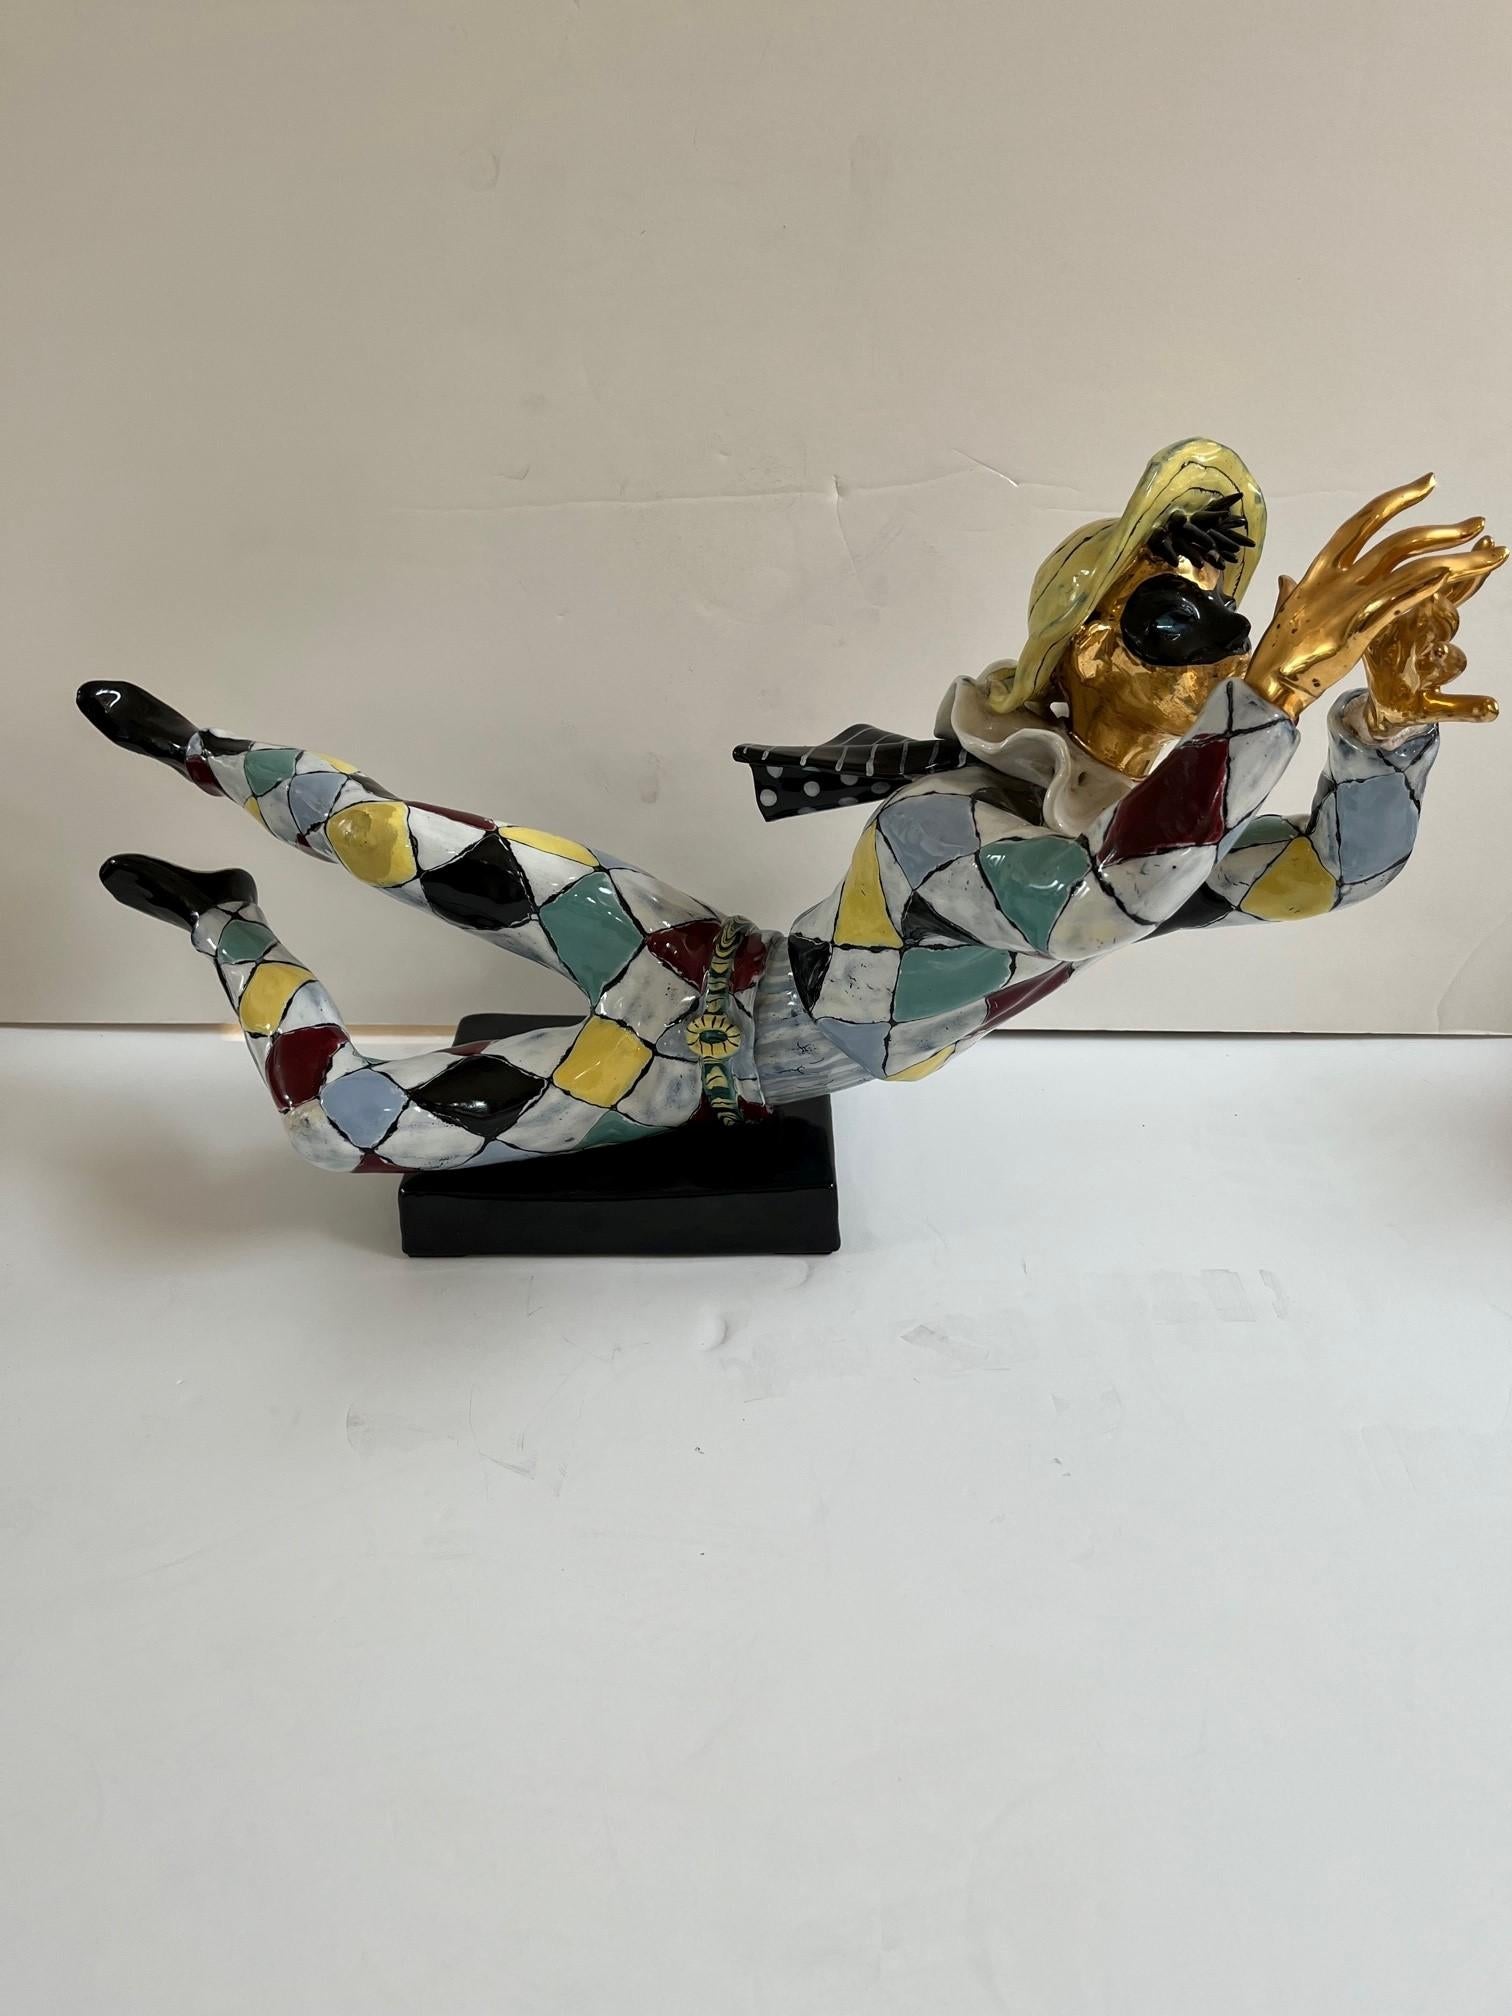 Vintage Italian Colorful Ceramic Harlequin Figure by Otello Rosa for San Polo For Sale 6